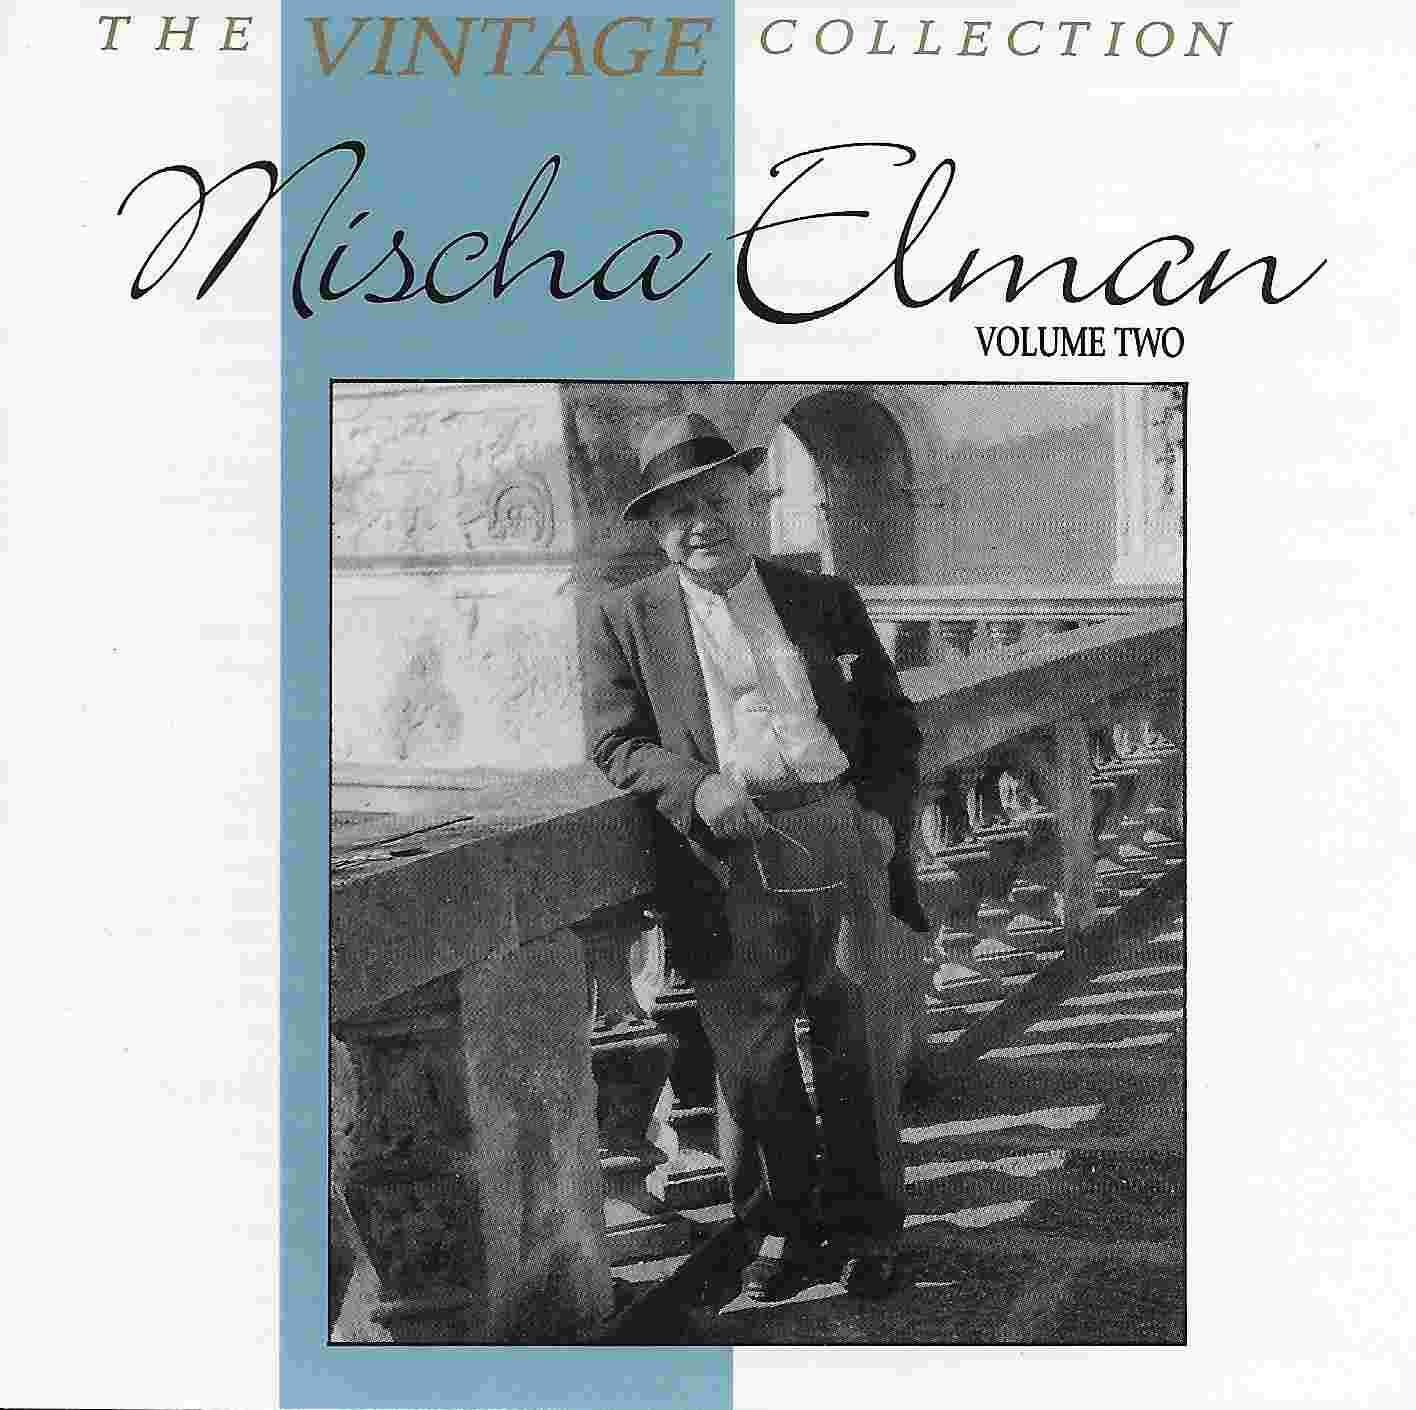 Picture of BBCCD753 The vintage collection - Mischa Elman 2 by artist Mischa Elman from the BBC cds - Records and Tapes library